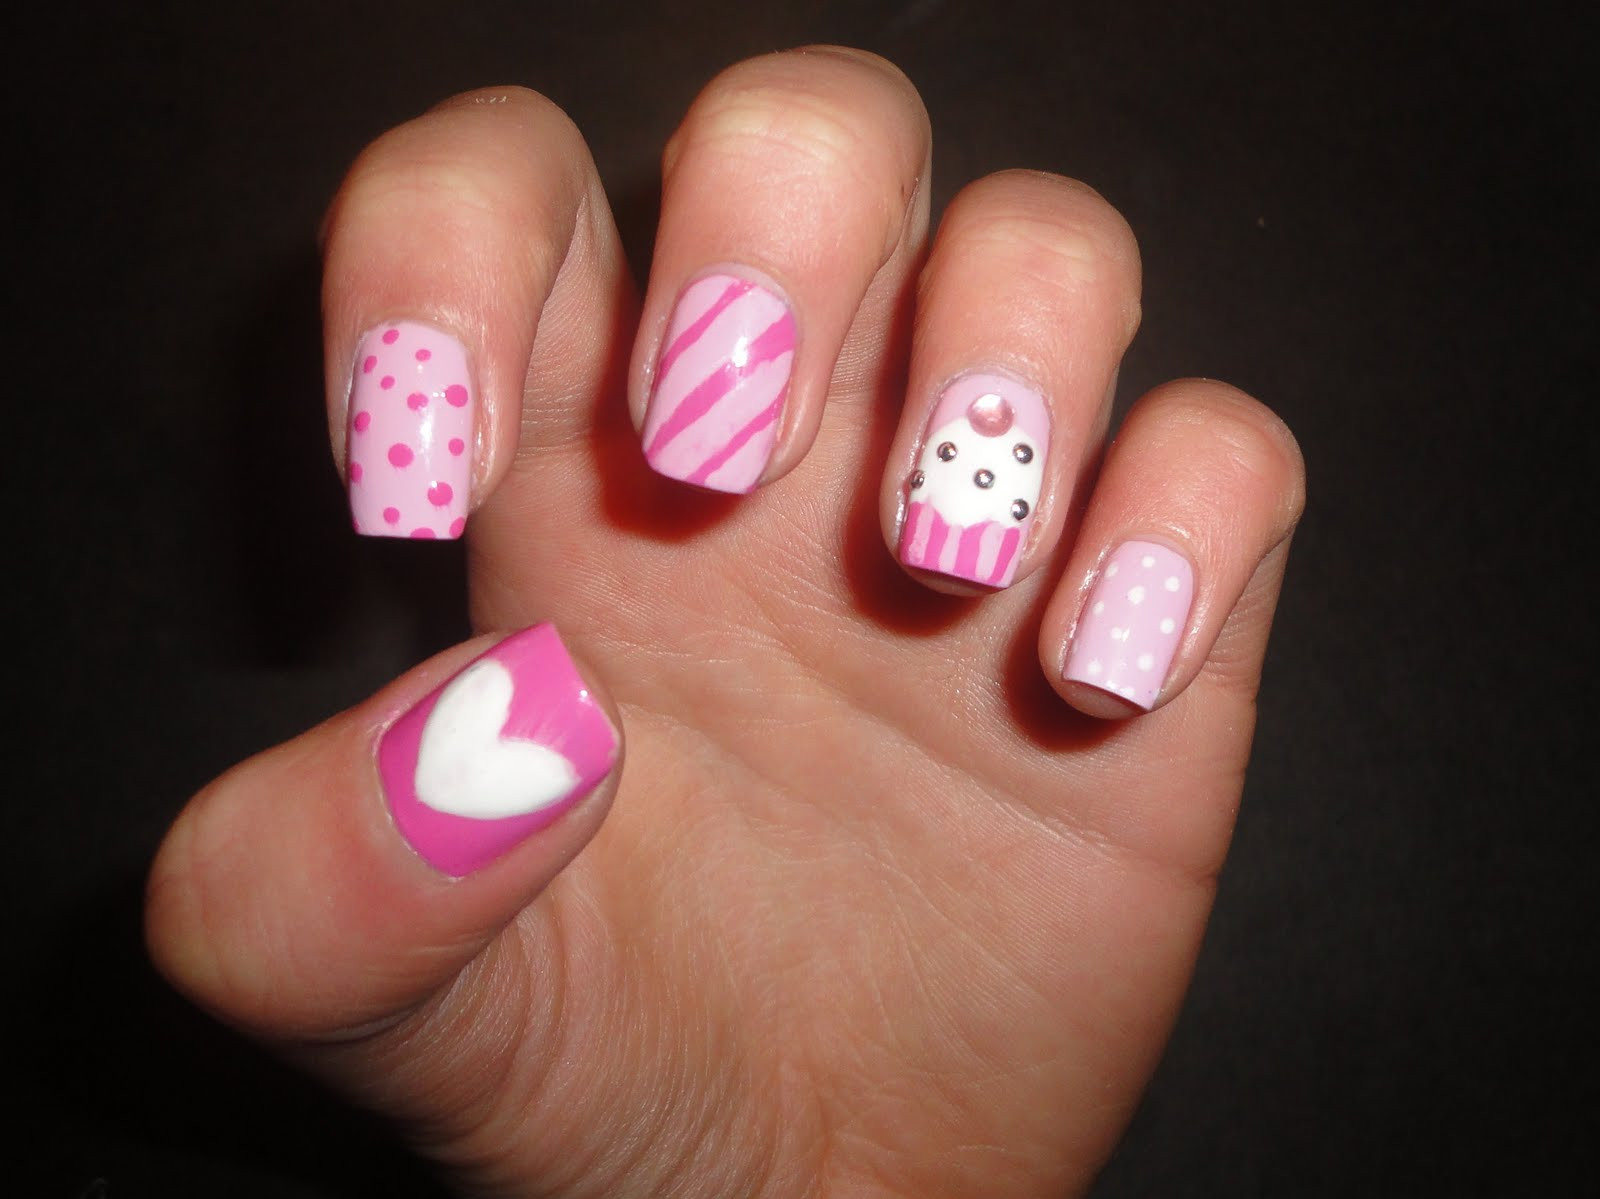 Cute But Easy Nail Designs
 Bow Ties and Barrettes HOT NAIL DESIGNS